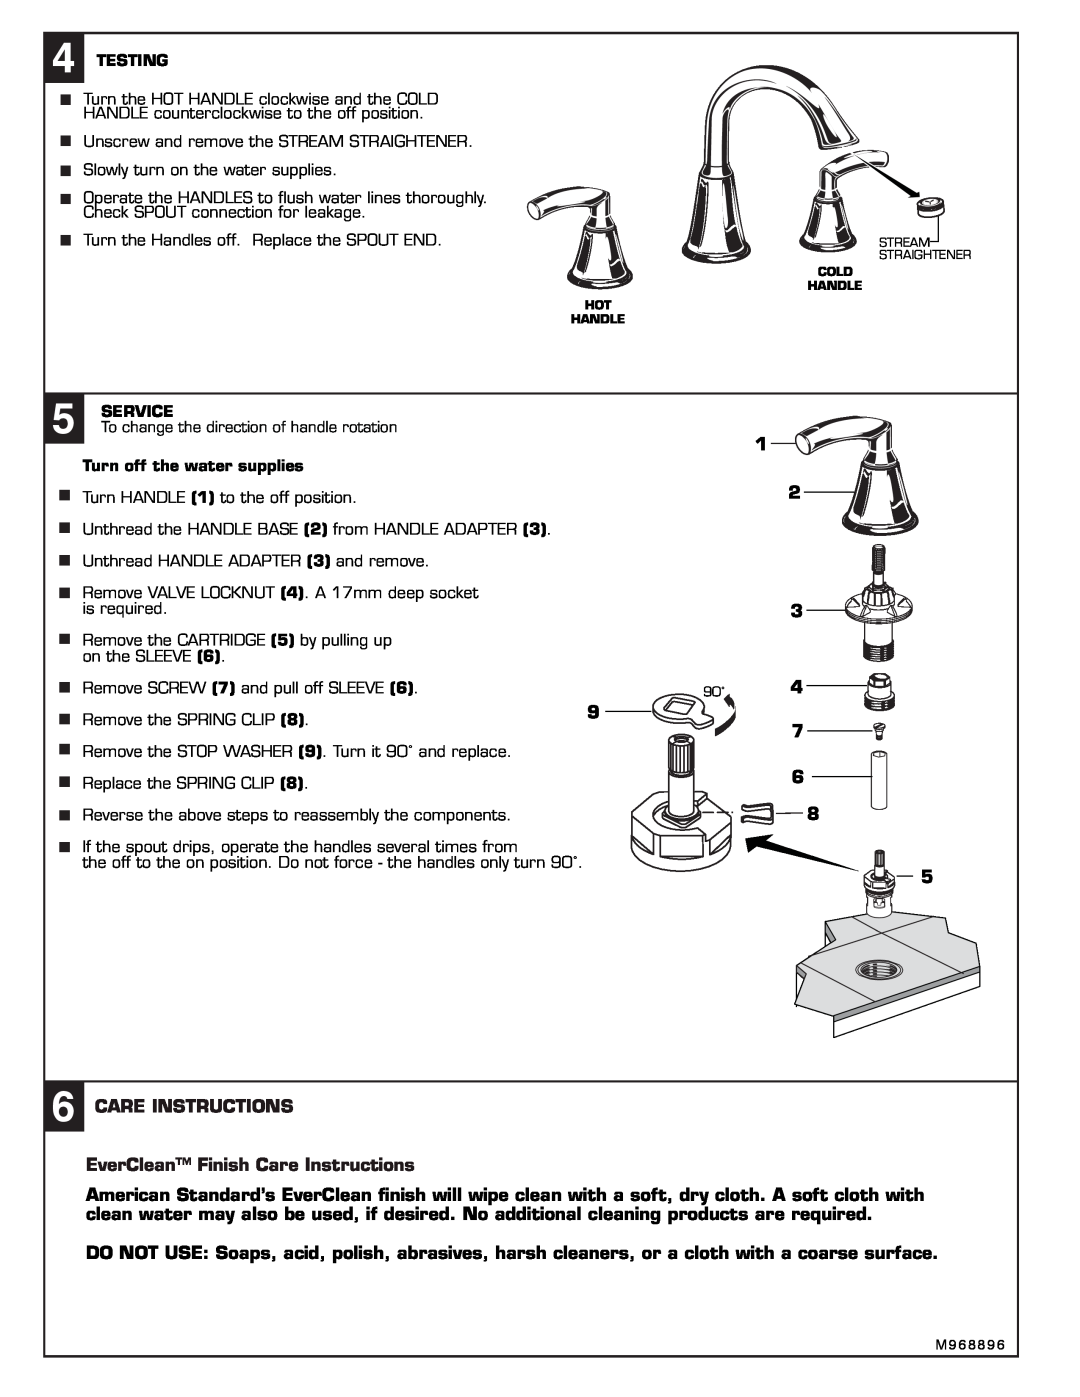 American Standard T038.900 installation instructions EverClean Finish Care Instructions, Turn off the water supplies 